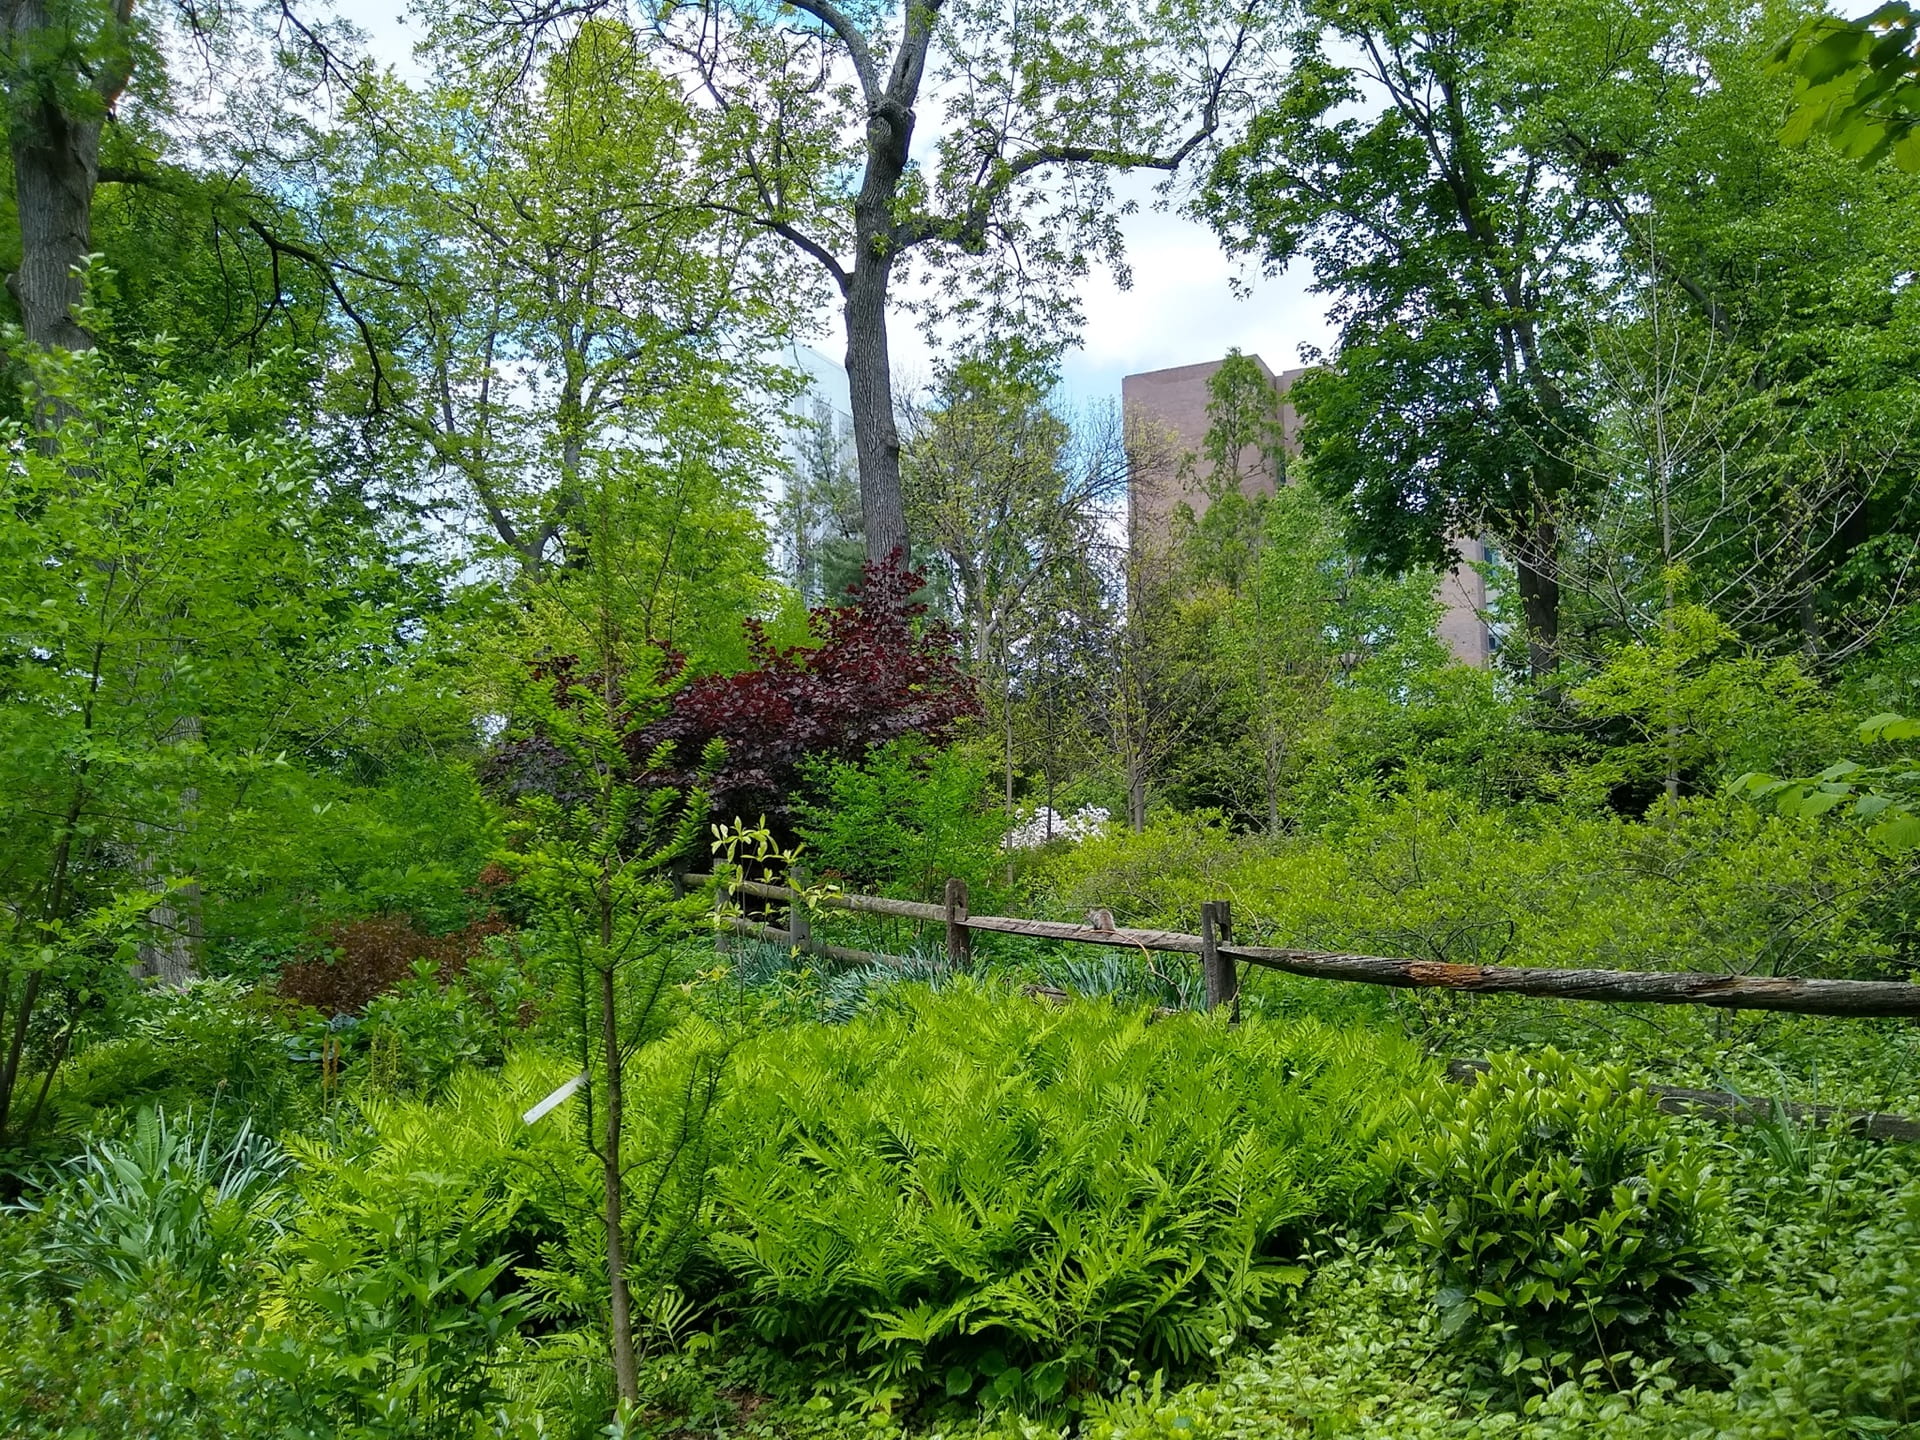 Newly emerged spring foliage transforms the park into a study of green.